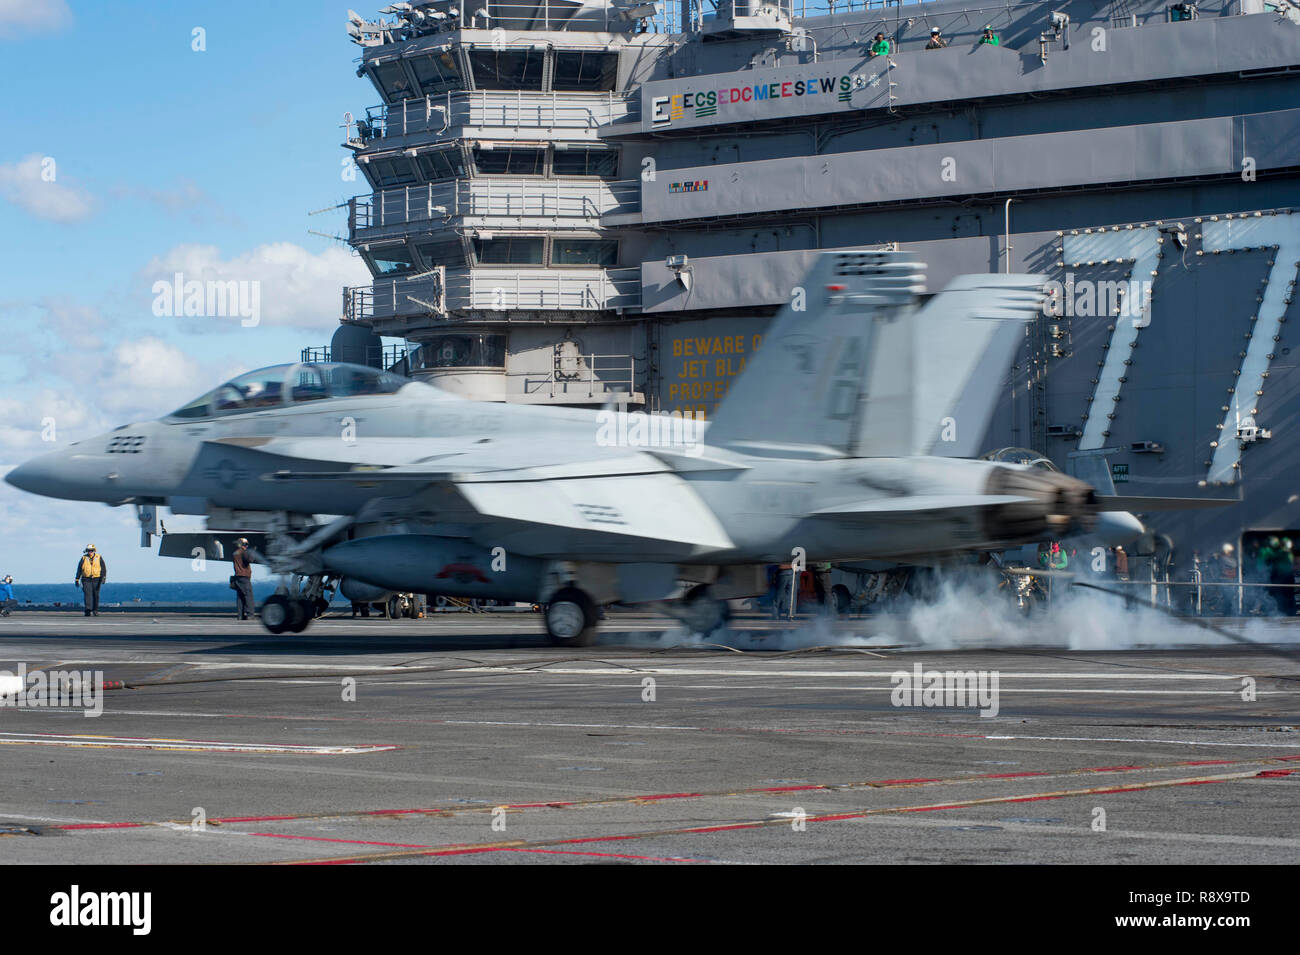 181204-N-EE423-0093 ATLANTIC OCEAN (Dec. 4, 2018) An F/A-18F Super Hornet lands on the flight deck aboard the aircraft carrier USS George H.W. Bush (CVN 77). GHWB is underway in the Atlantic Ocean conducting routine training exercises to maintain carrier readiness. (U.S. Navy photo by Mass Communication Specialist Seaman Apprentice Sophie Pinkham) Stock Photo